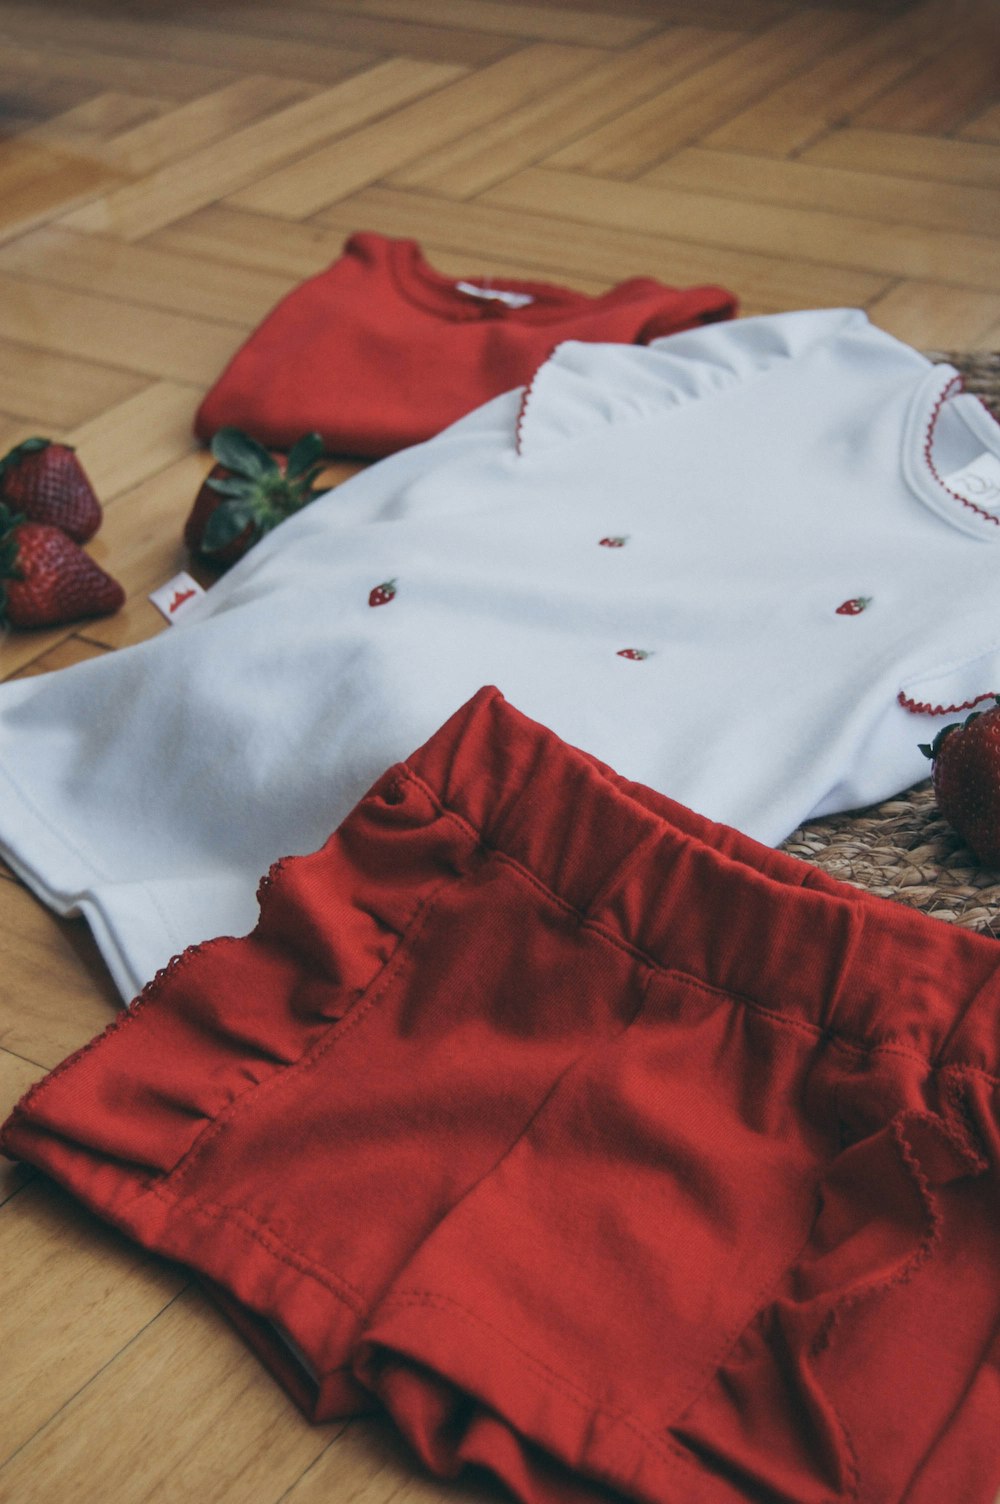 red shorts and white shirt on brown surface